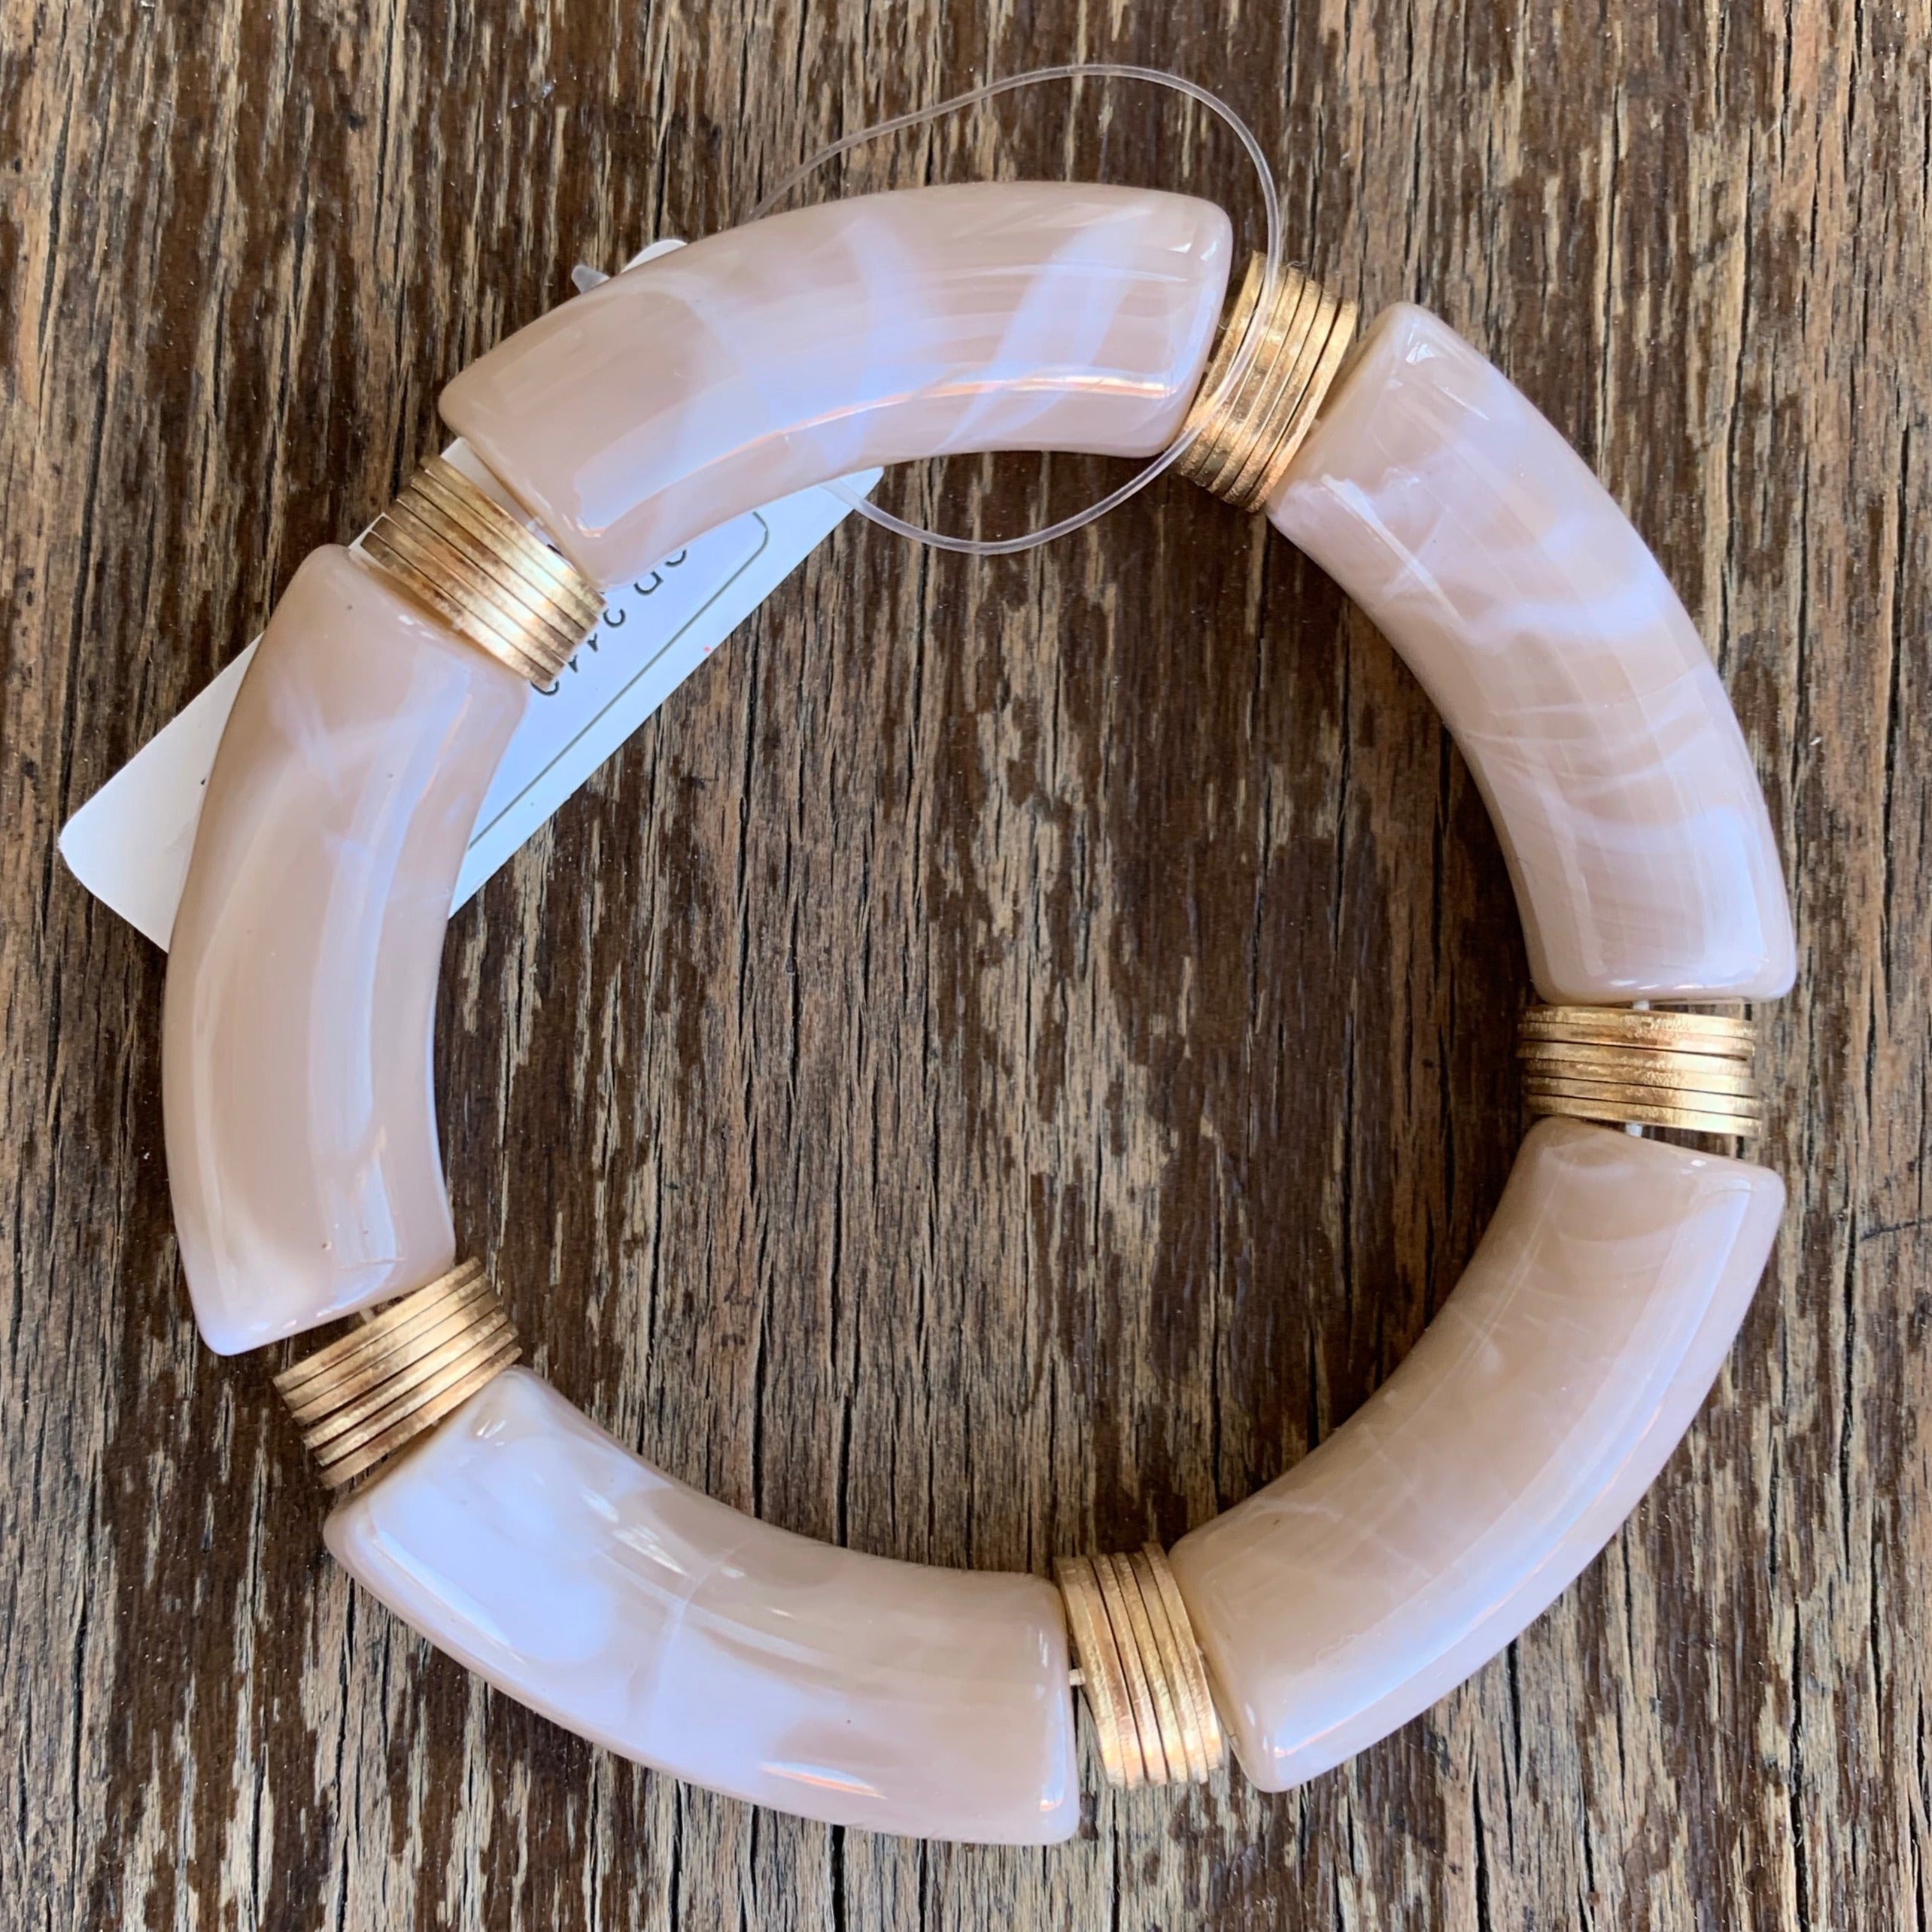 Bamboo Tube Stretch Bracelet - Pink with Gold accents